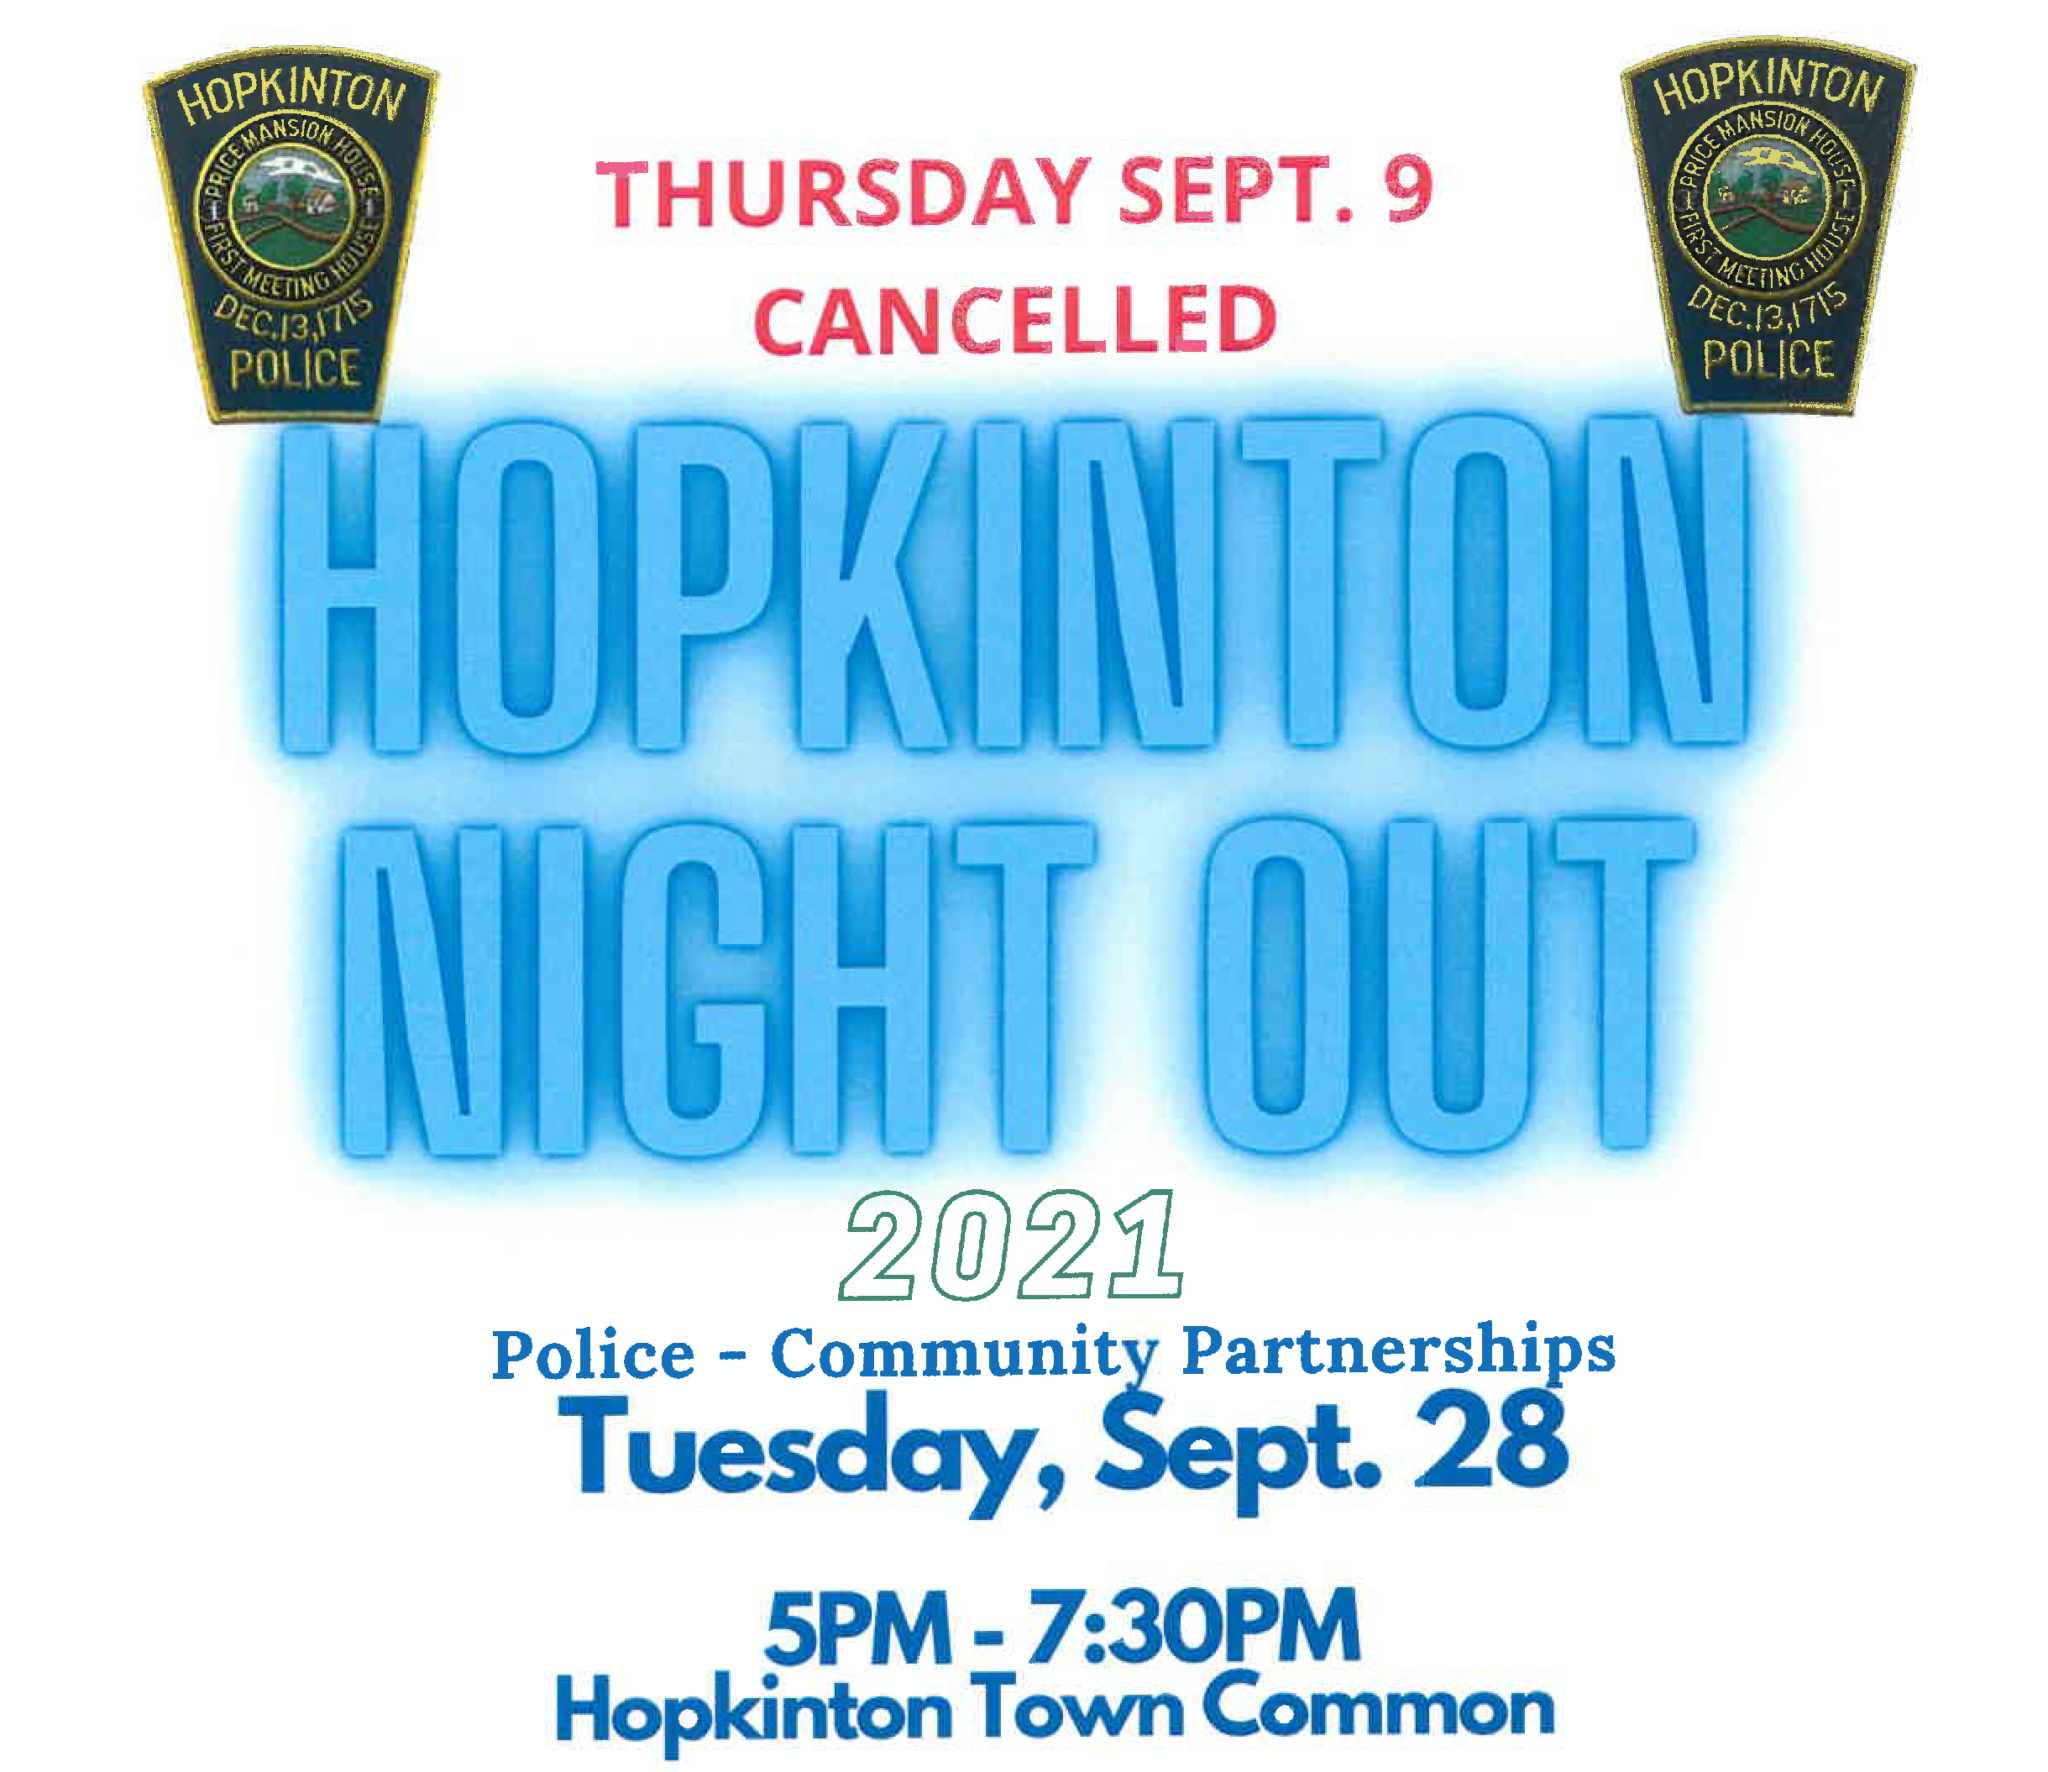 HPD Hopkinton Night Out rescheduled to Sept. 28